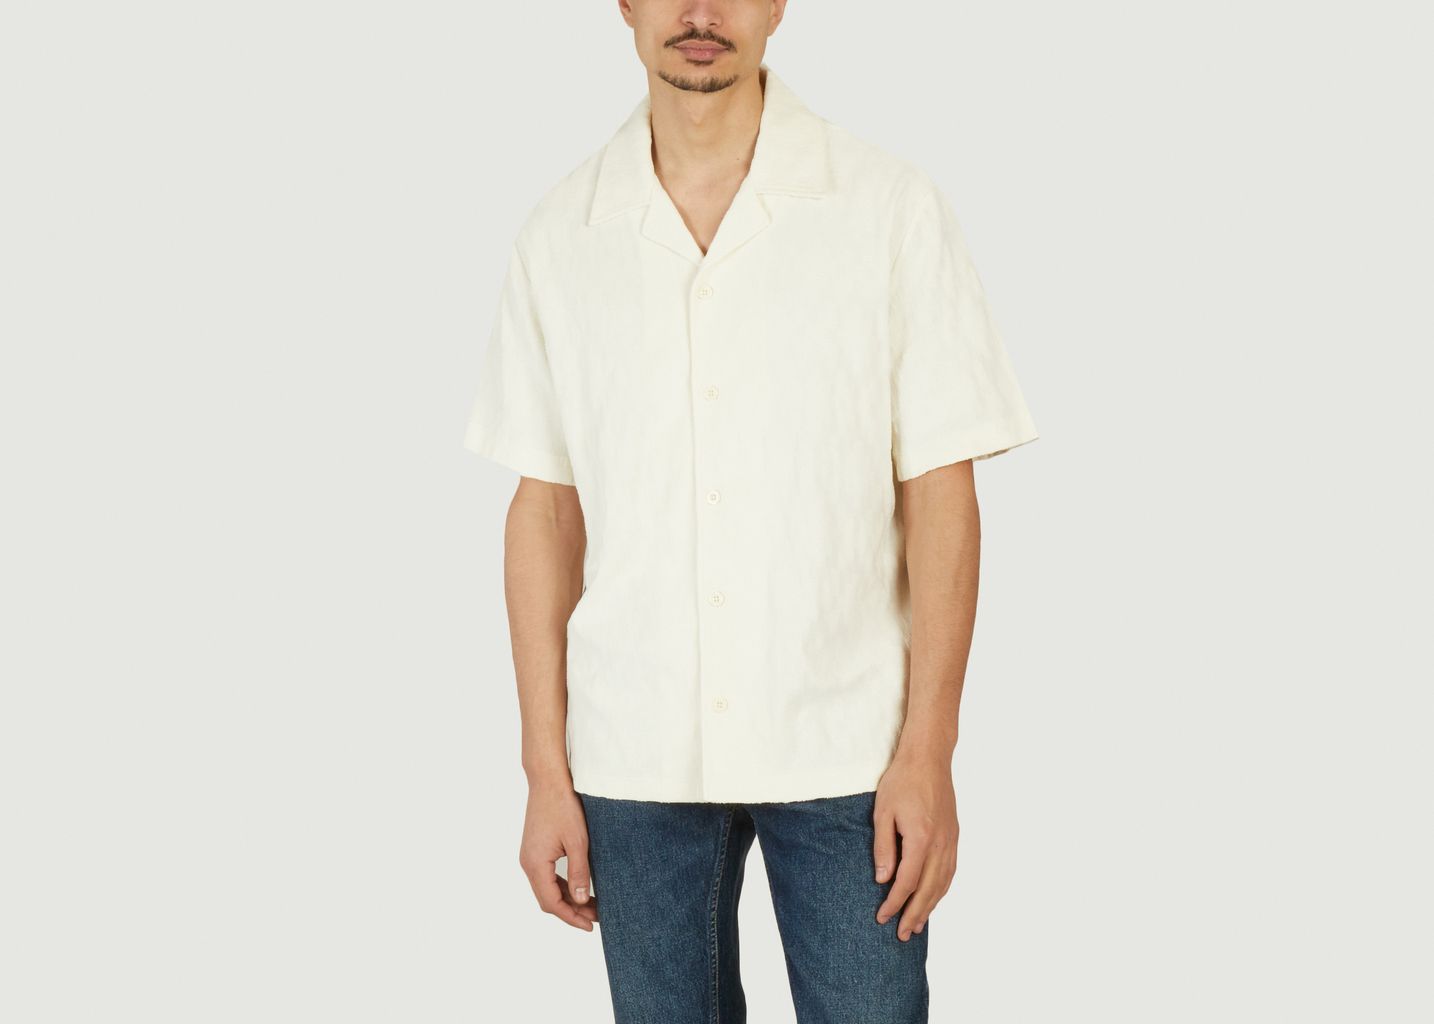 Relaxed fit textured jacquard bluse - Gant